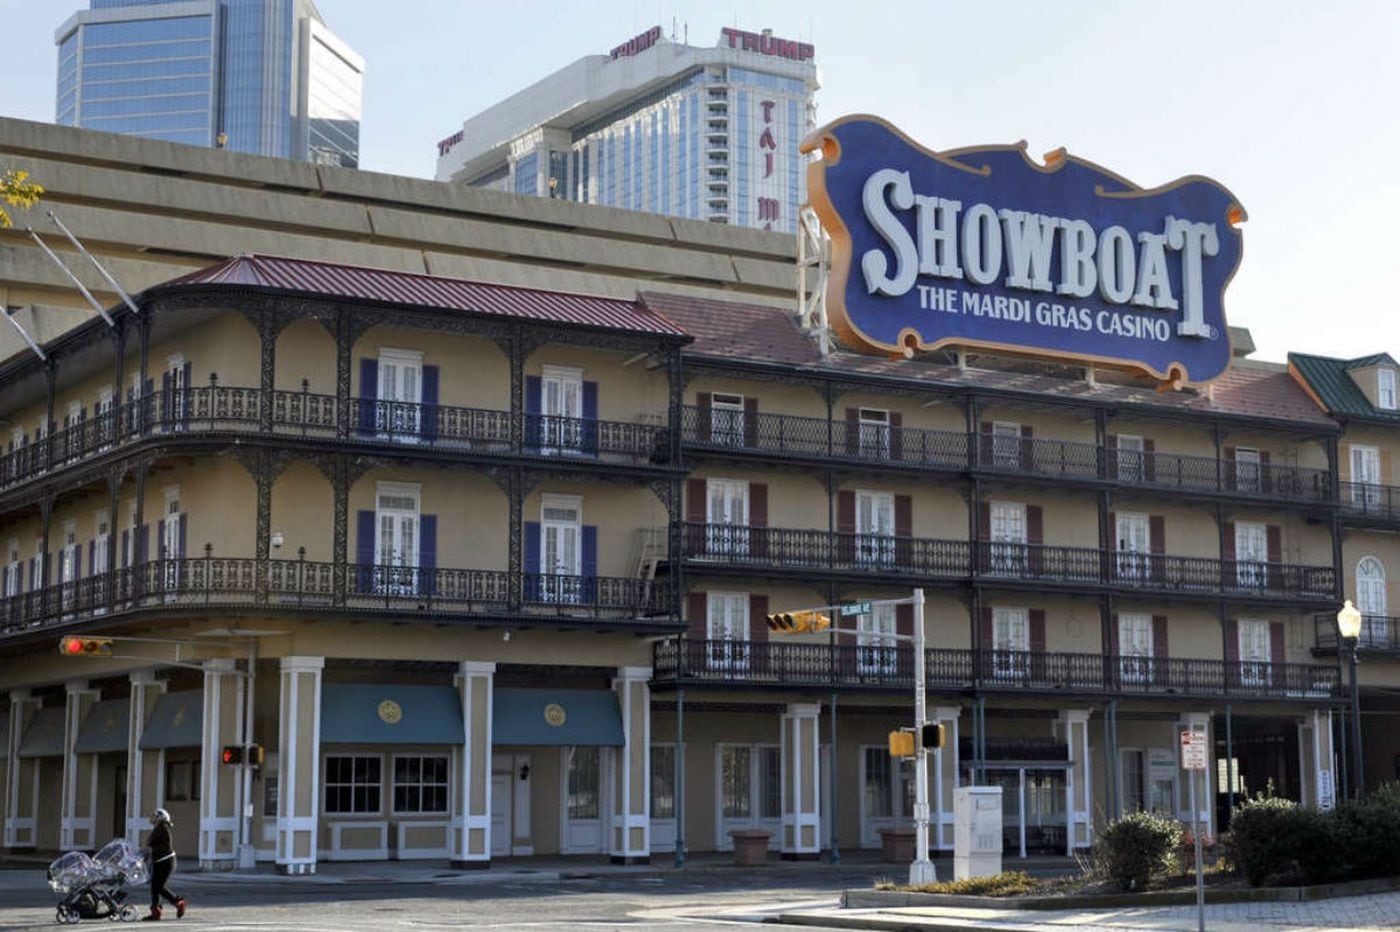 Blatstein To Reopen Showboat In Atlantic City With No Casino